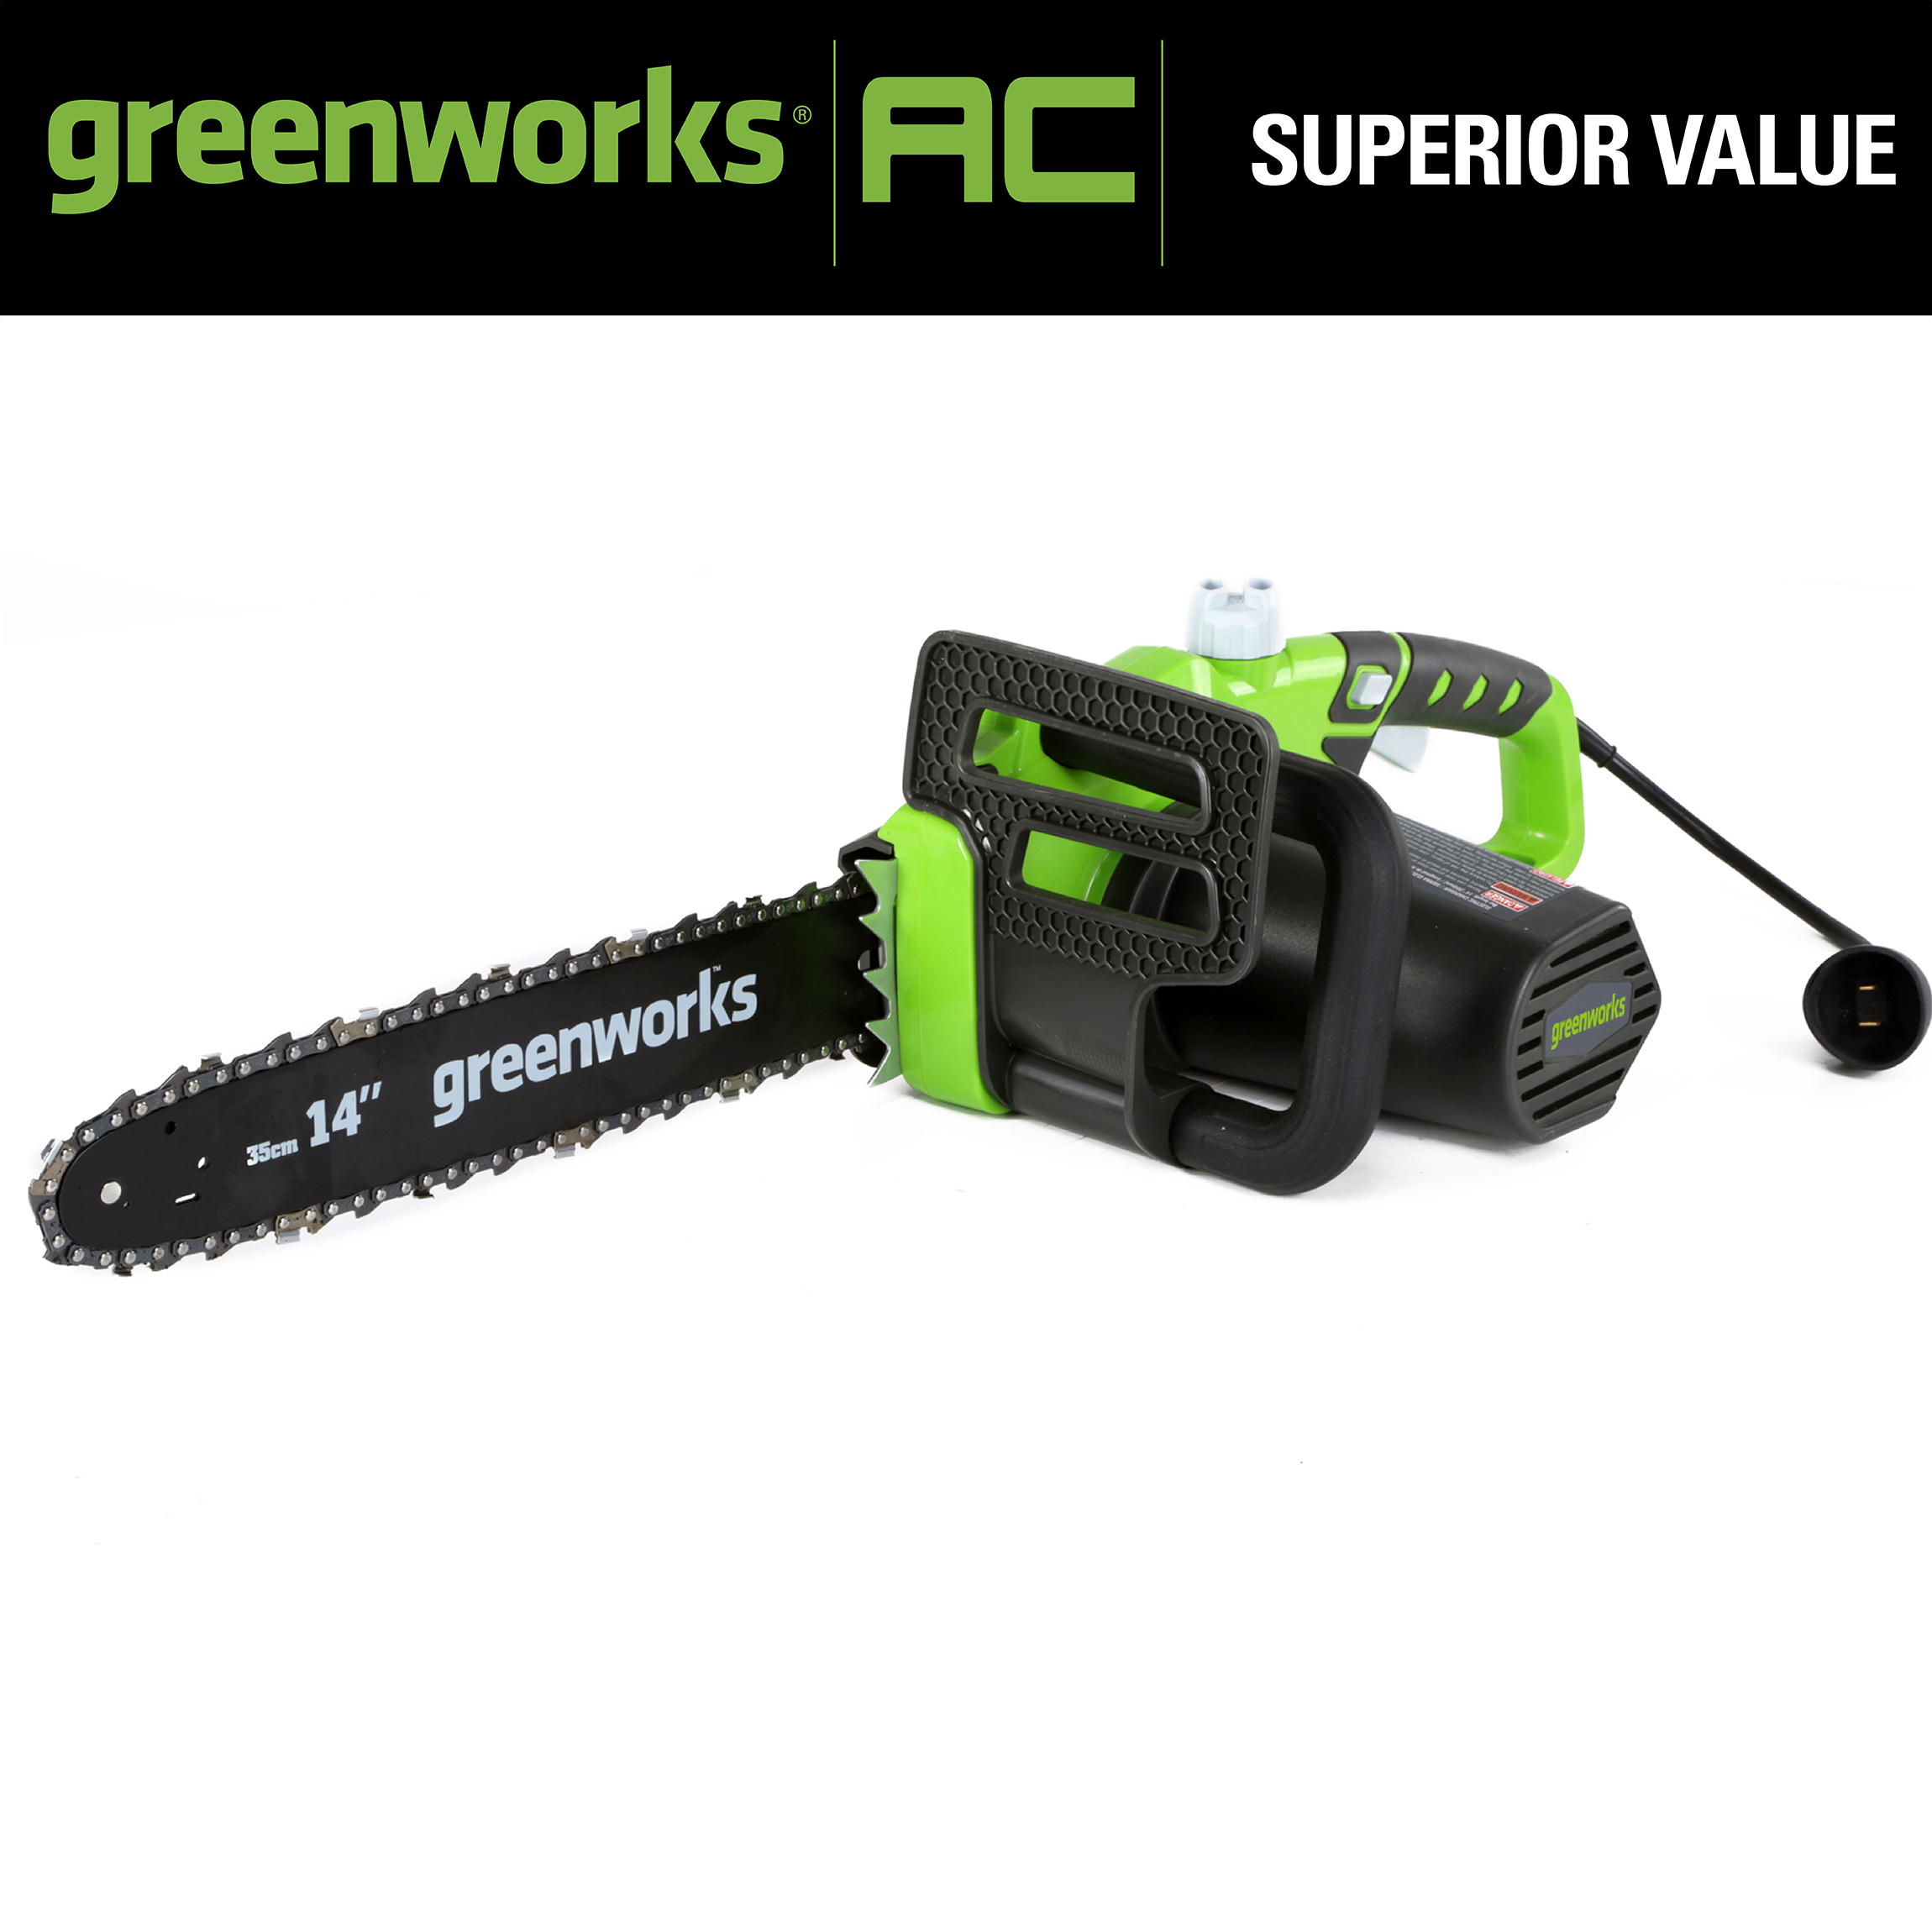 Greenworks 14" Corded Electric 10.5 Amp Chainsaw 20222 - image 3 of 11